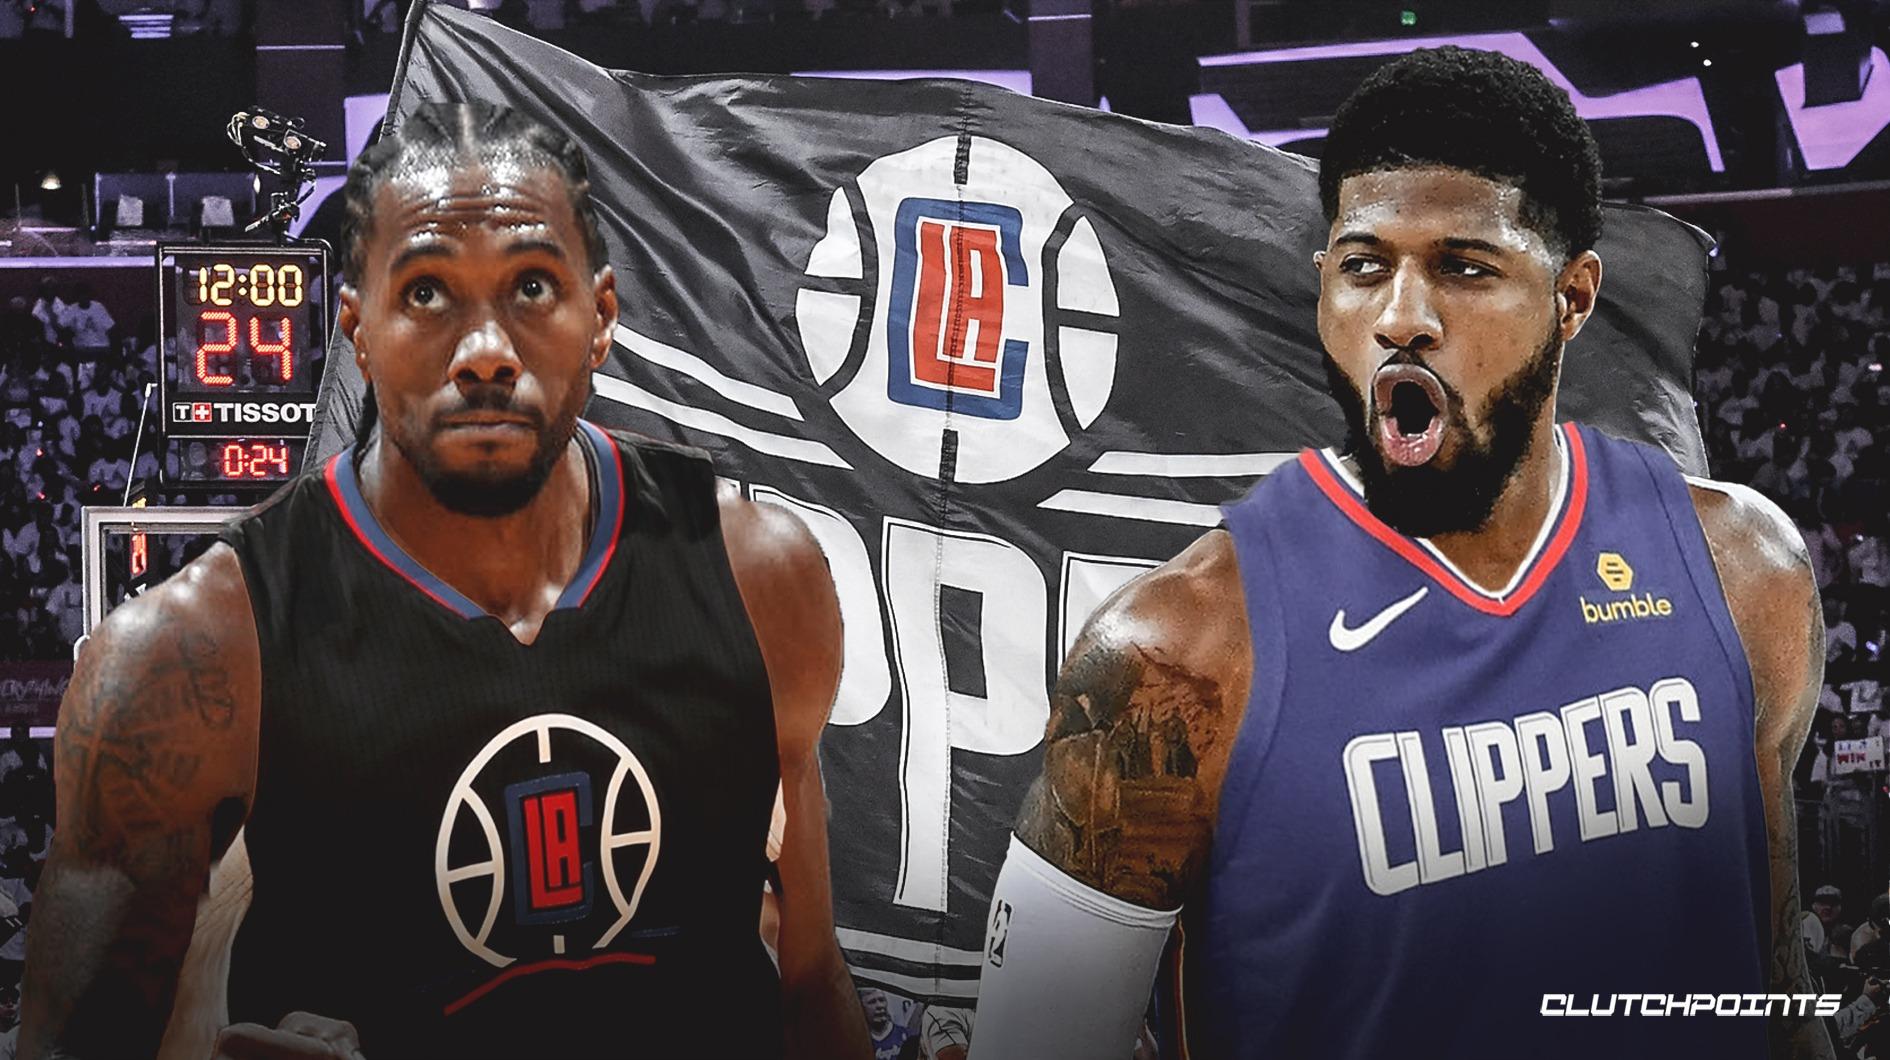 Clippers news: Paul George teases LA fans decked out in gear